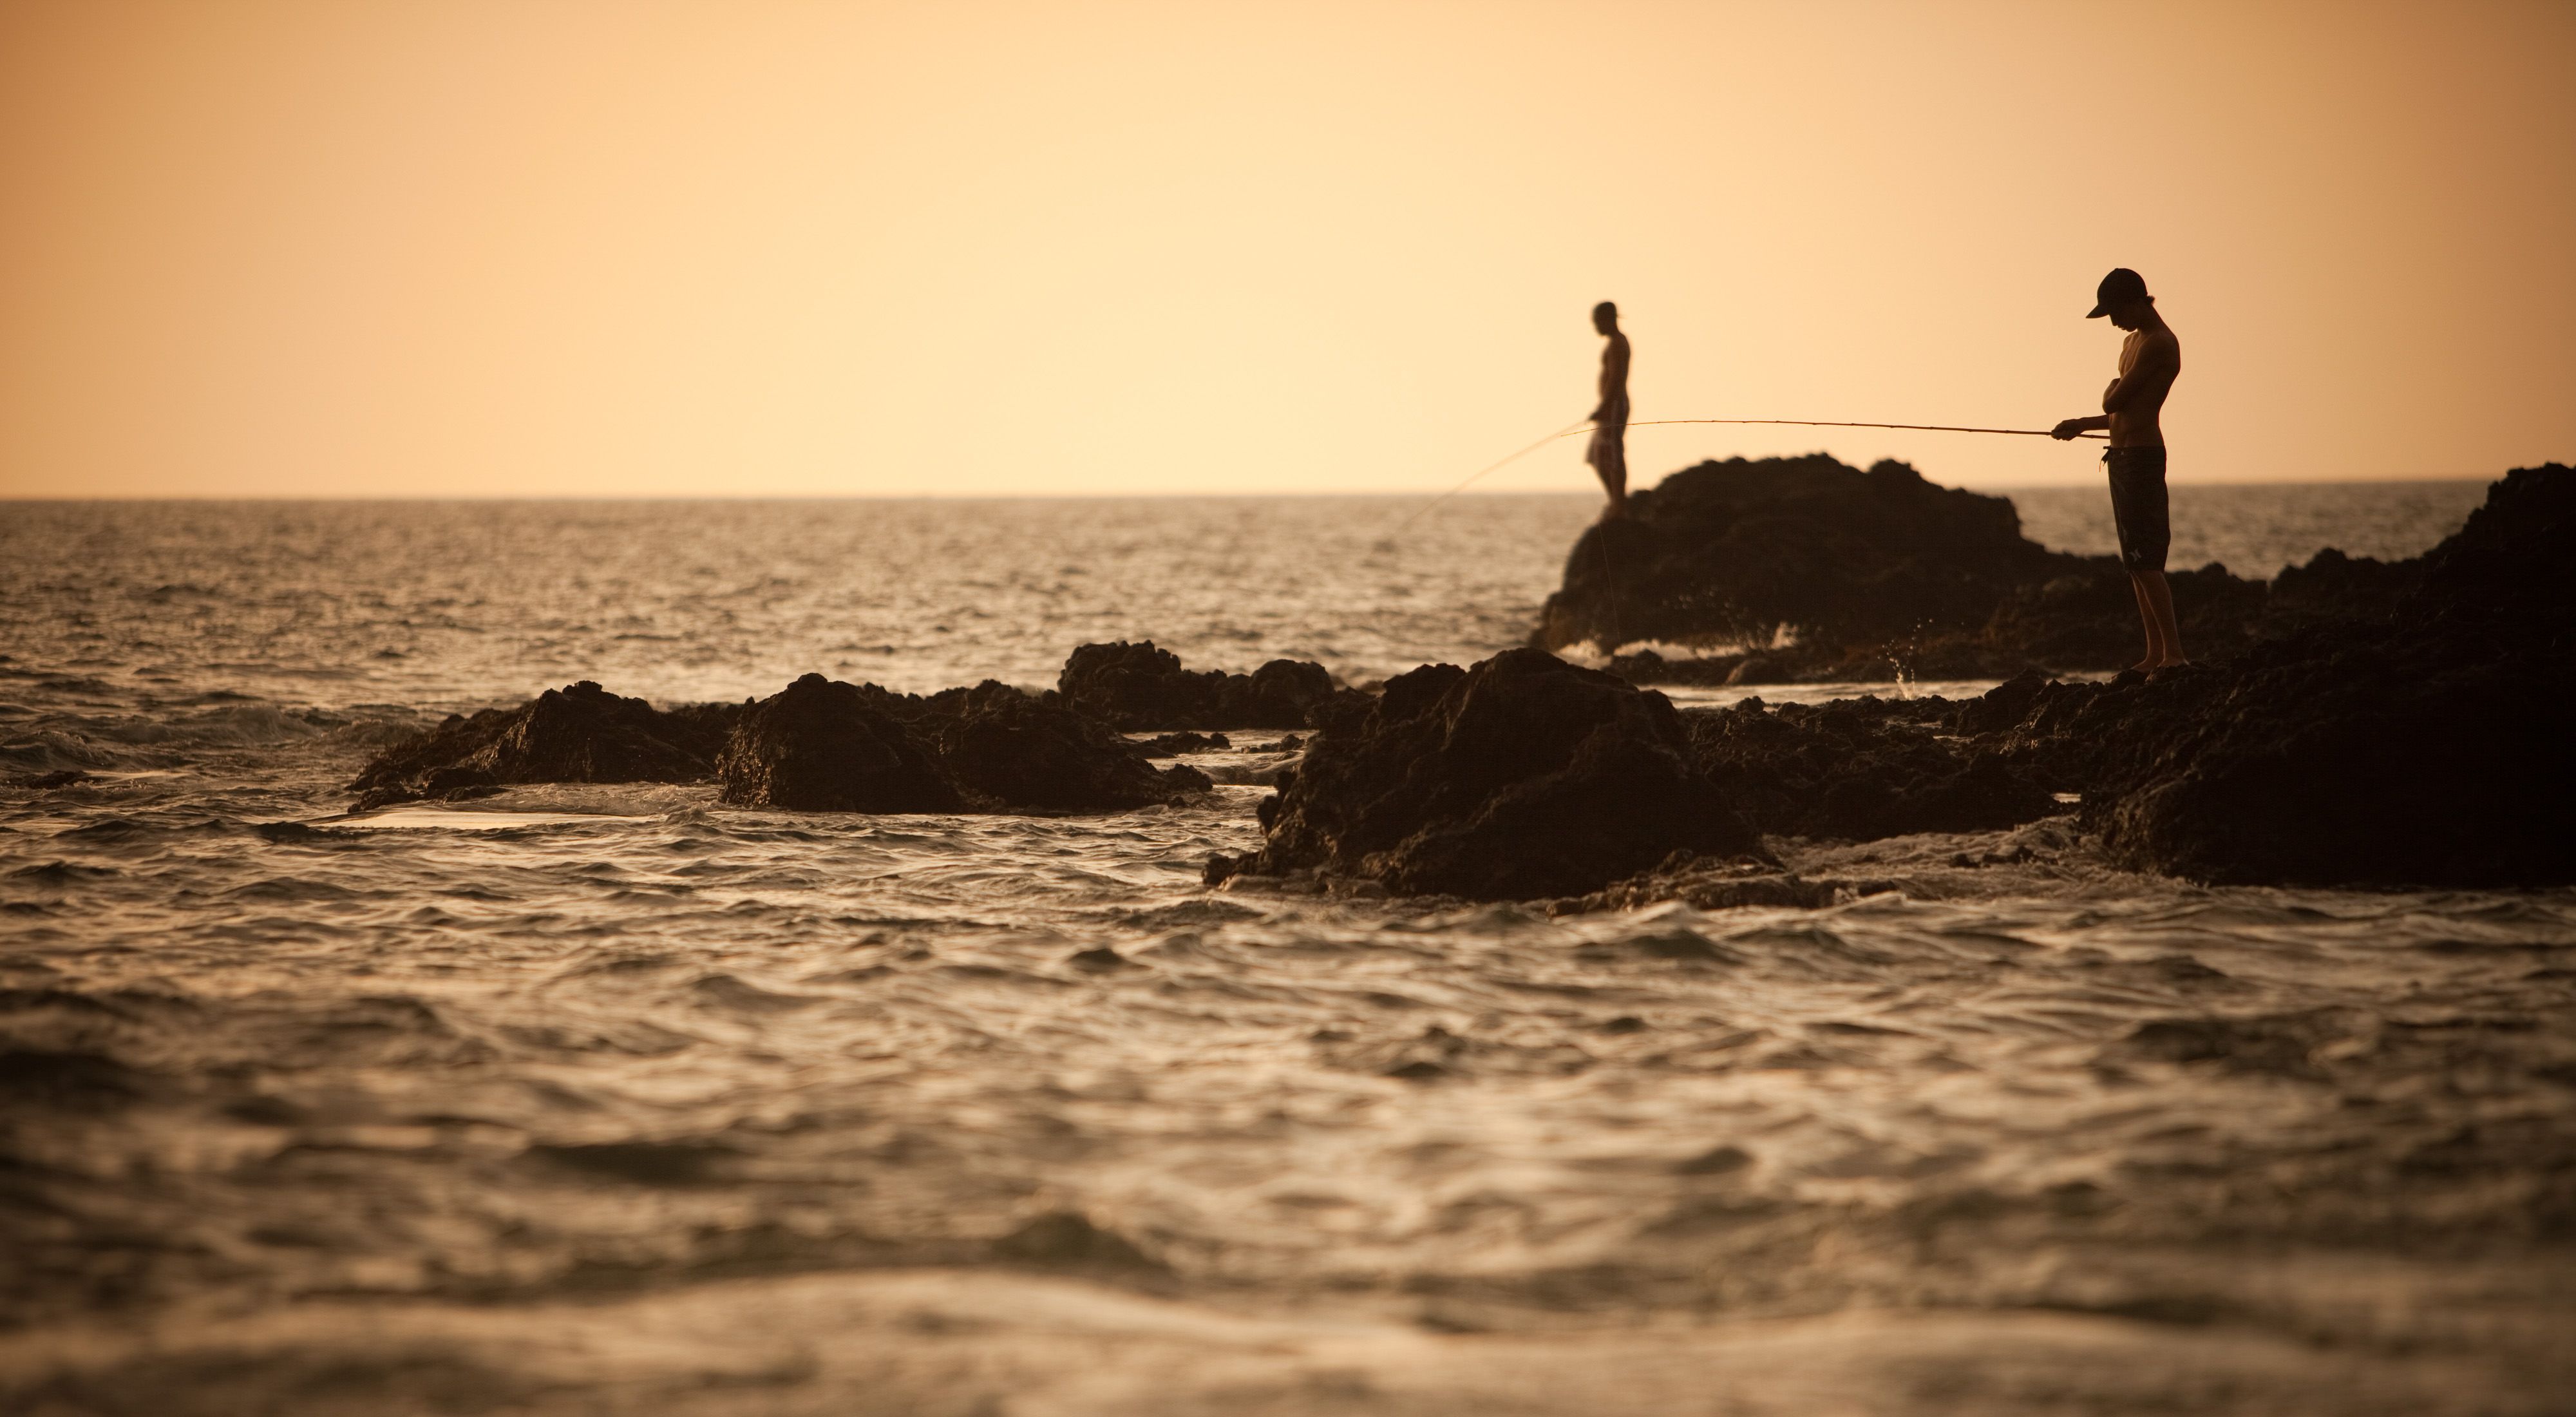 Two people fishing on the rocks of a shoreline at dusk.